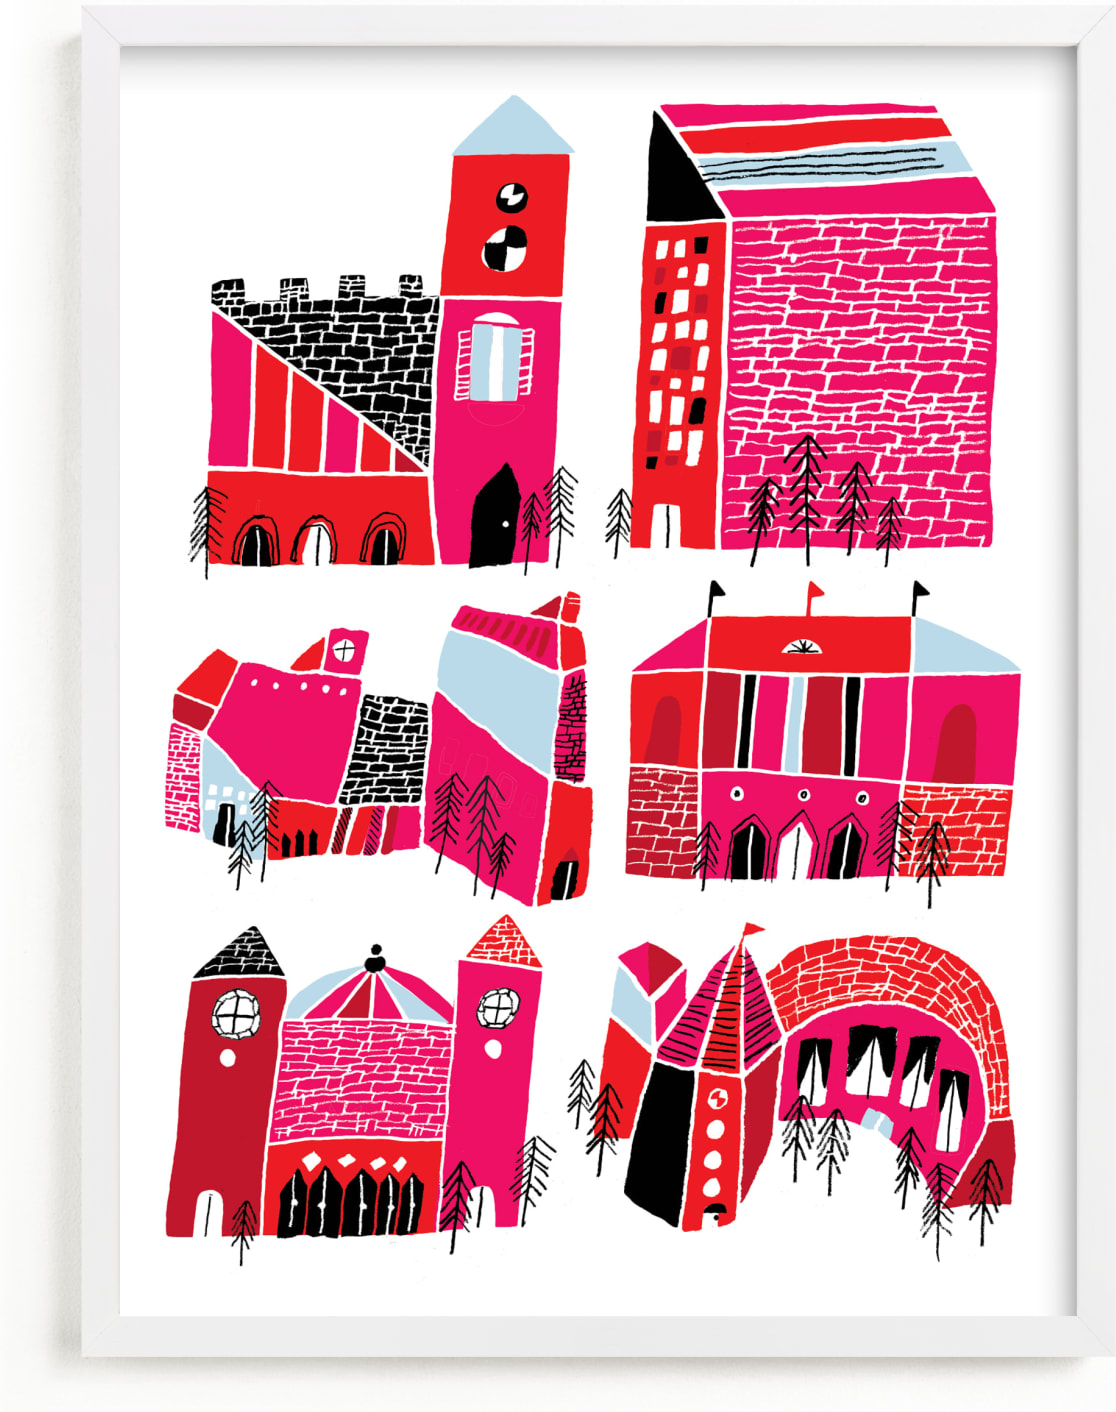 This is a colorful kids wall art by Elliot Stokes called Little Buildings.